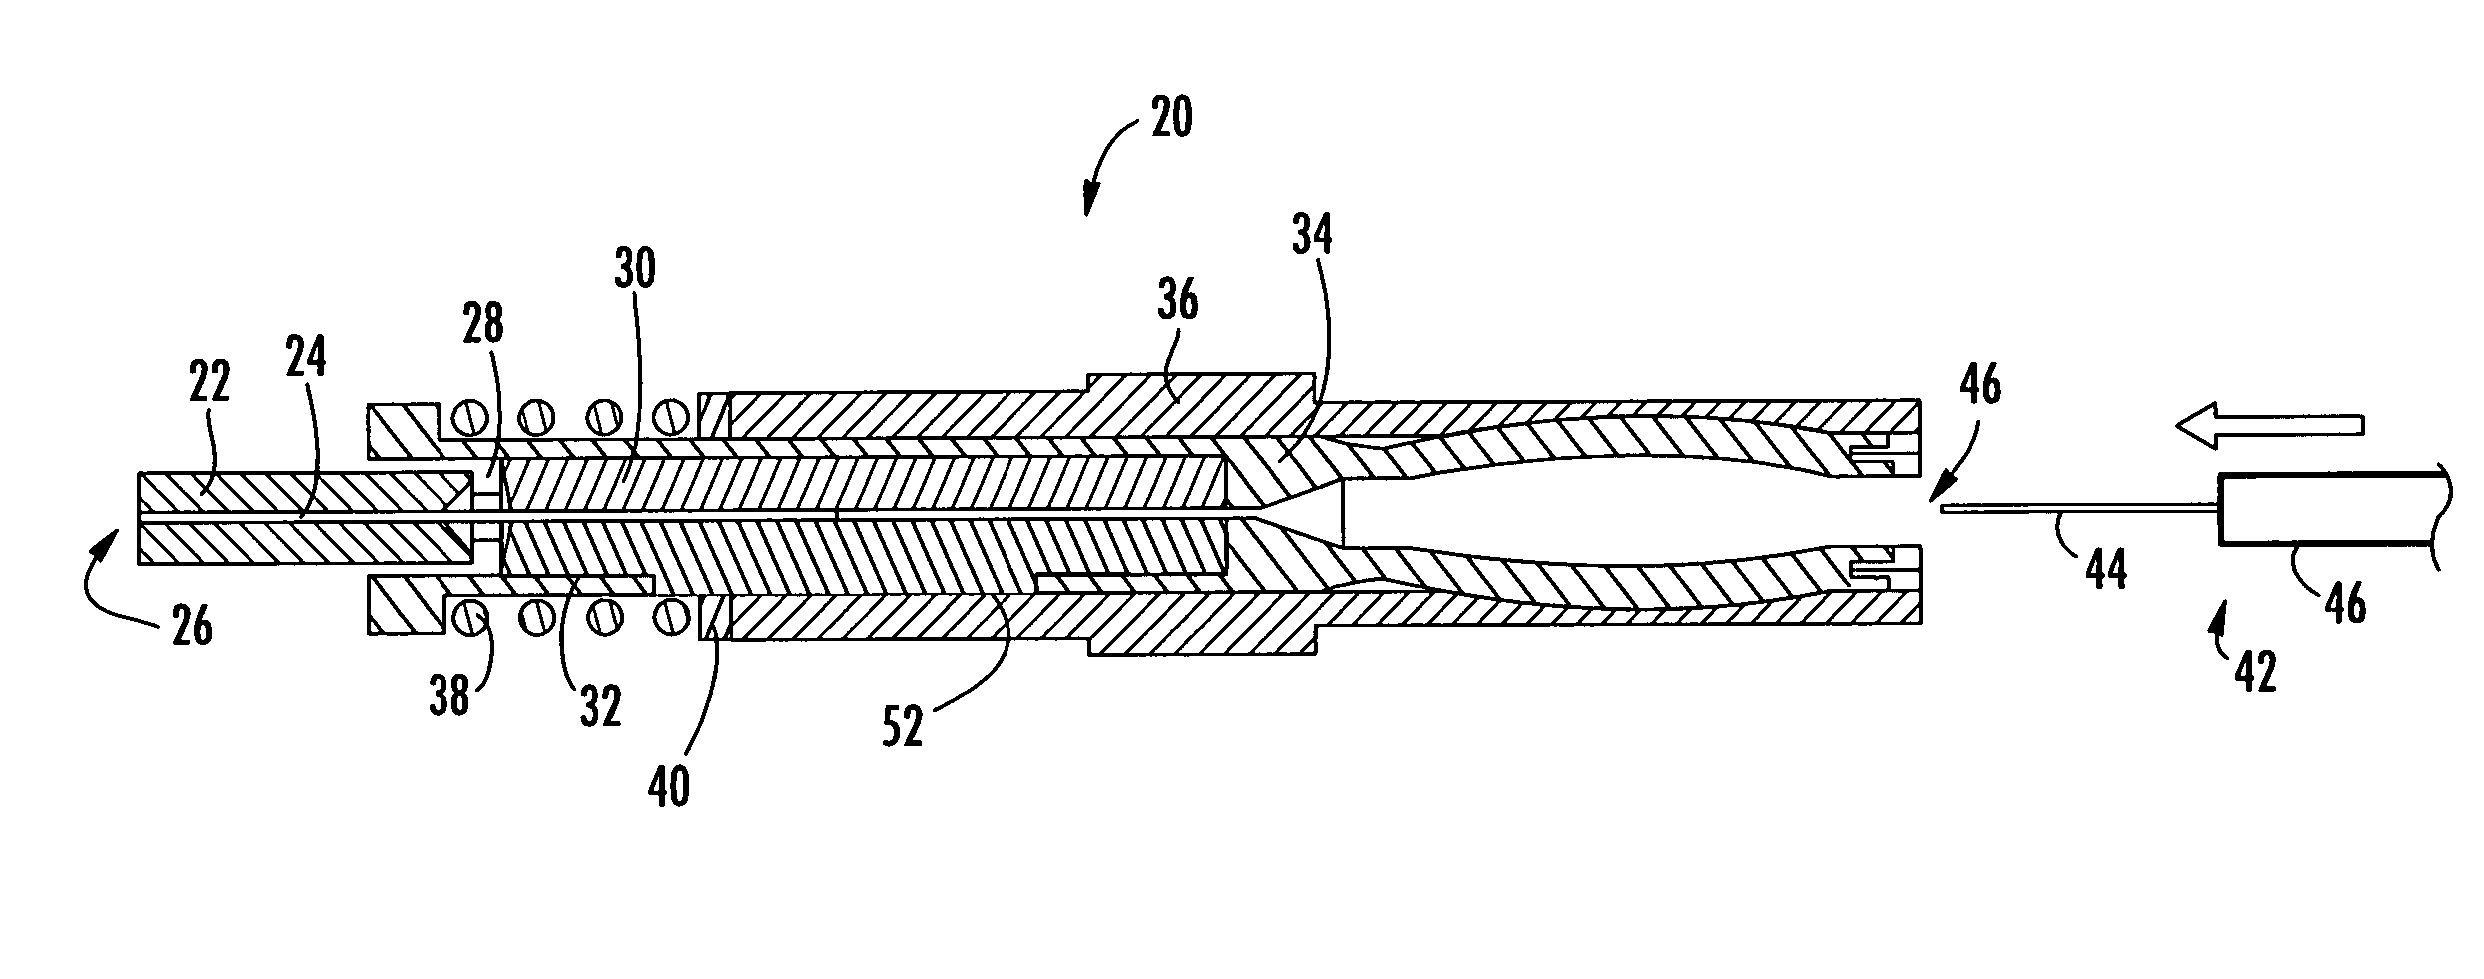 Mechanical splice connector with sequential splice and strain relief